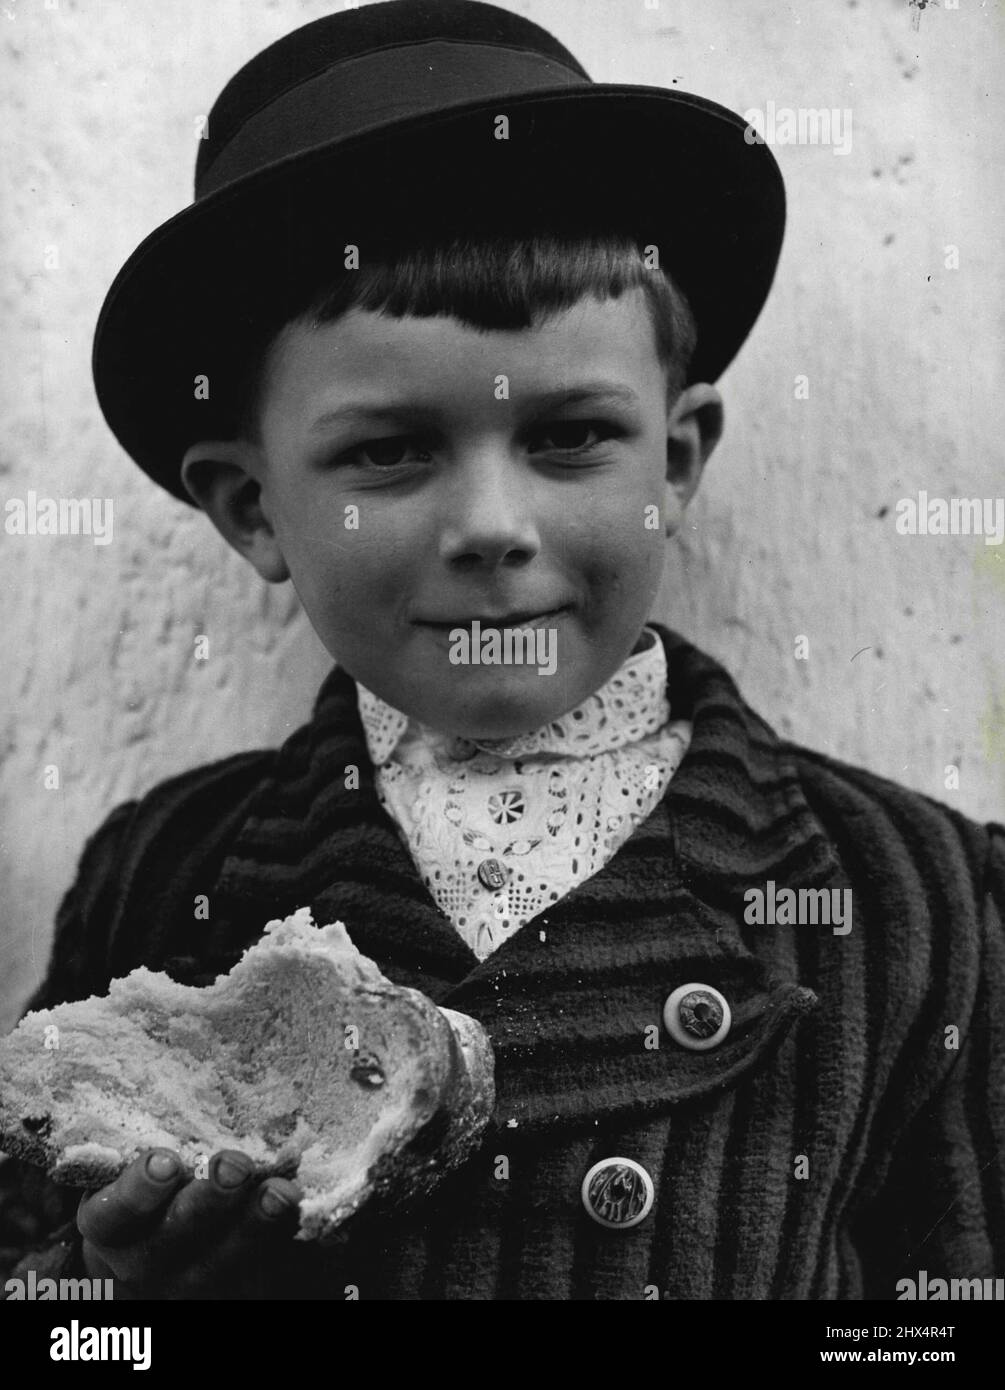 Czechoslovakia. Dapper: A peasant boy in handmade lace shirt and other finery. September 24, 1938. (Photo by Margaret Bourke-White, Pictures Incorporated). Stock Photo